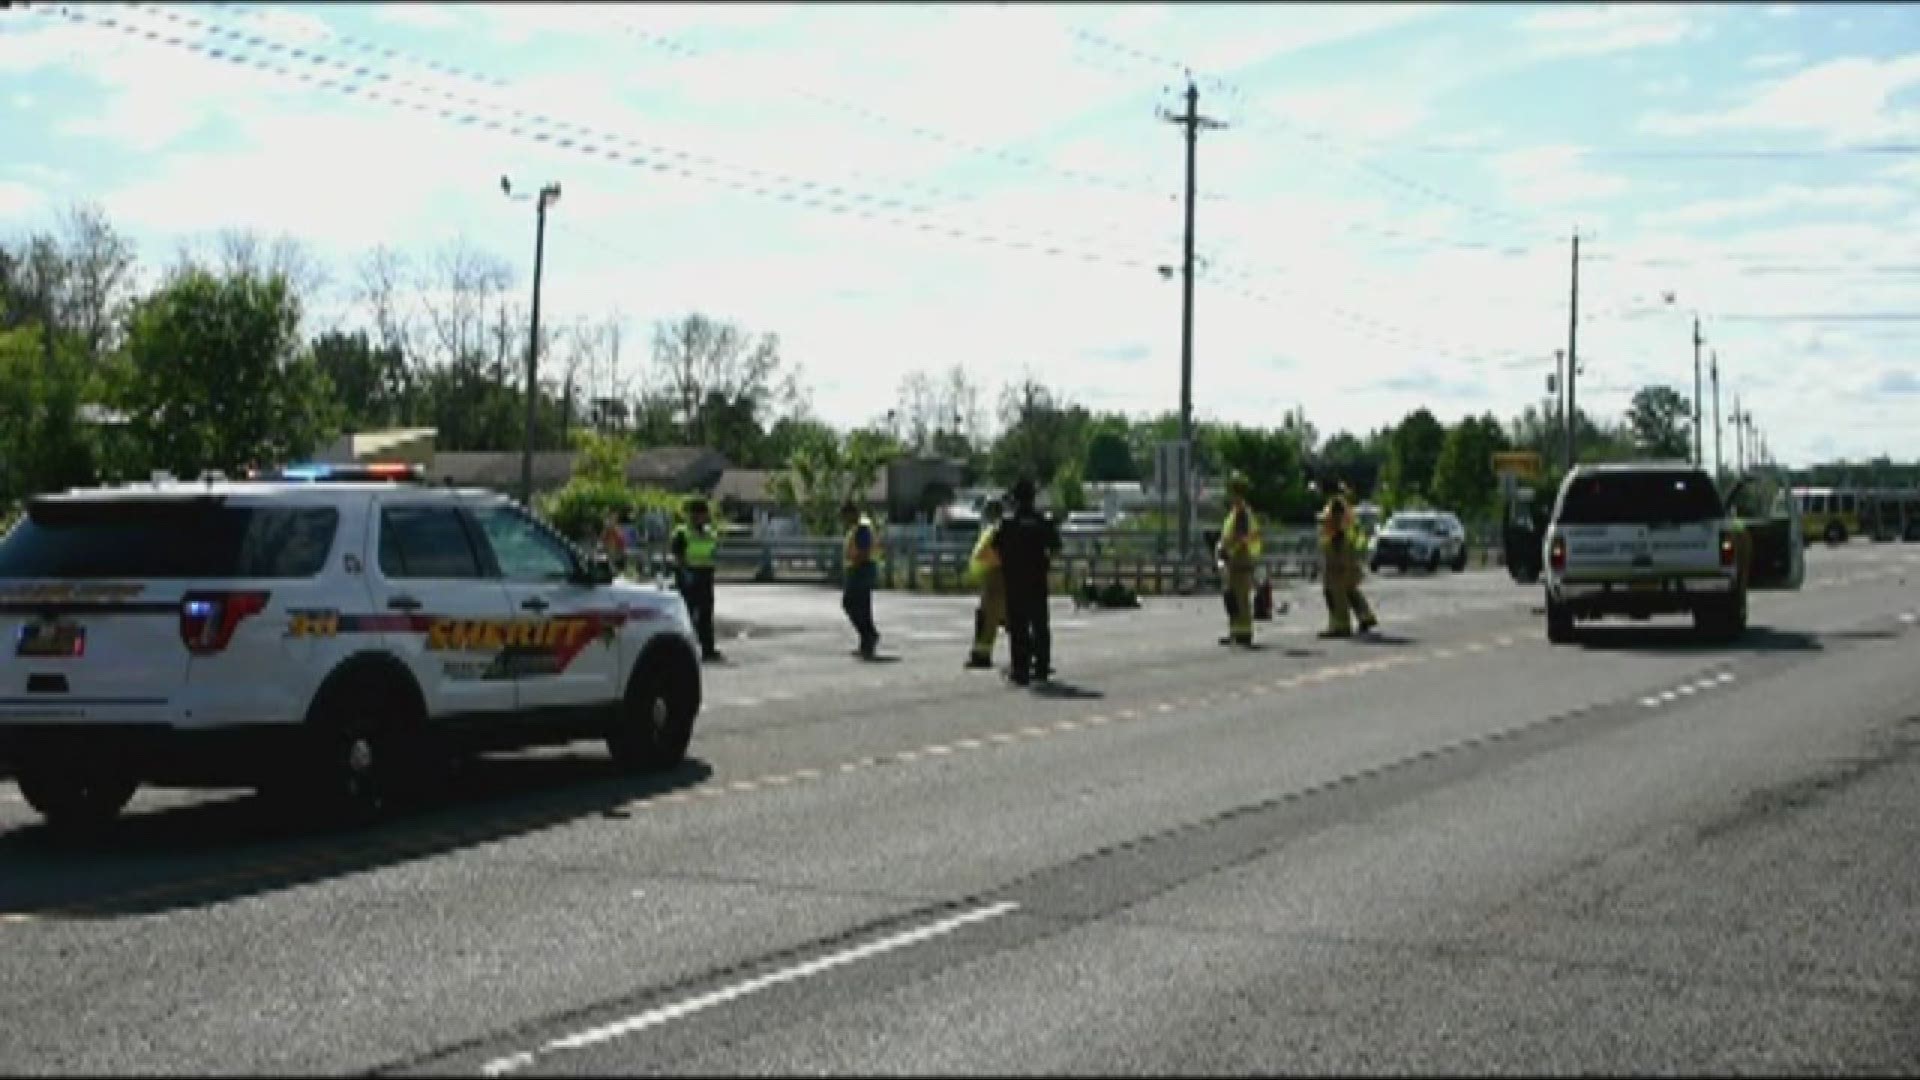 Motorcyclist hospitalized following accident on NF Blvd | wgrz.com